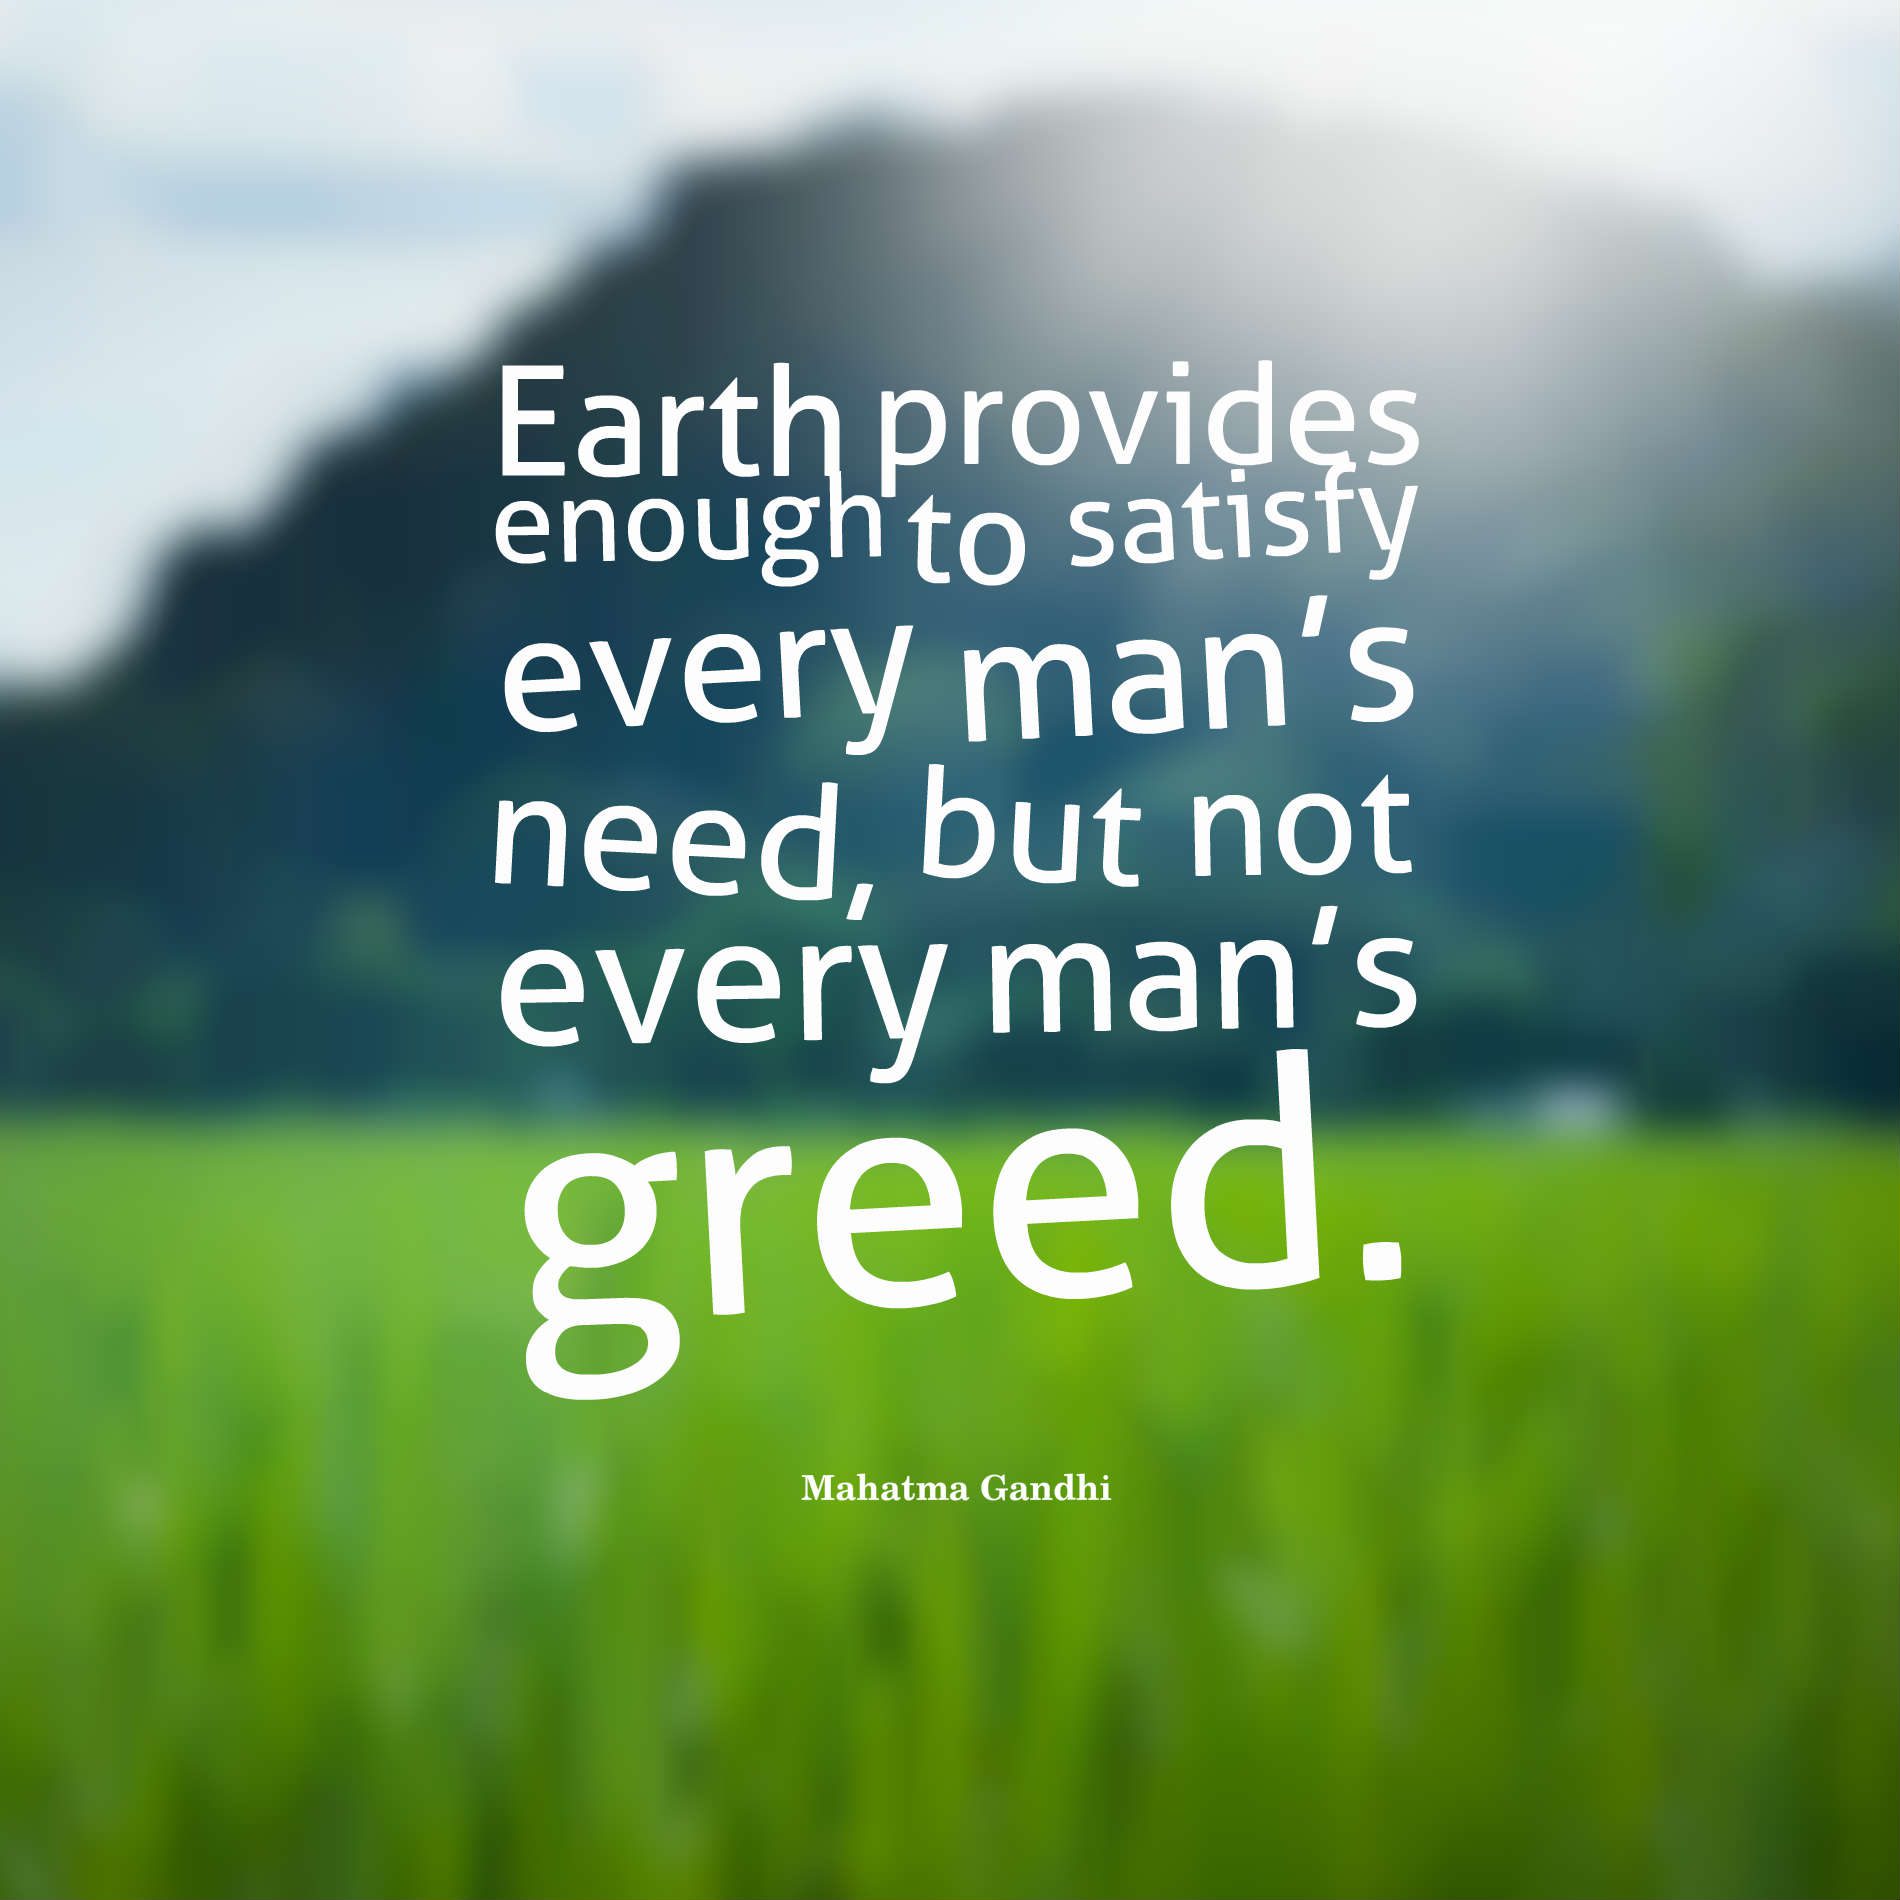 Earth provides enough to satisfy every man’s need, but not every man’s greed.